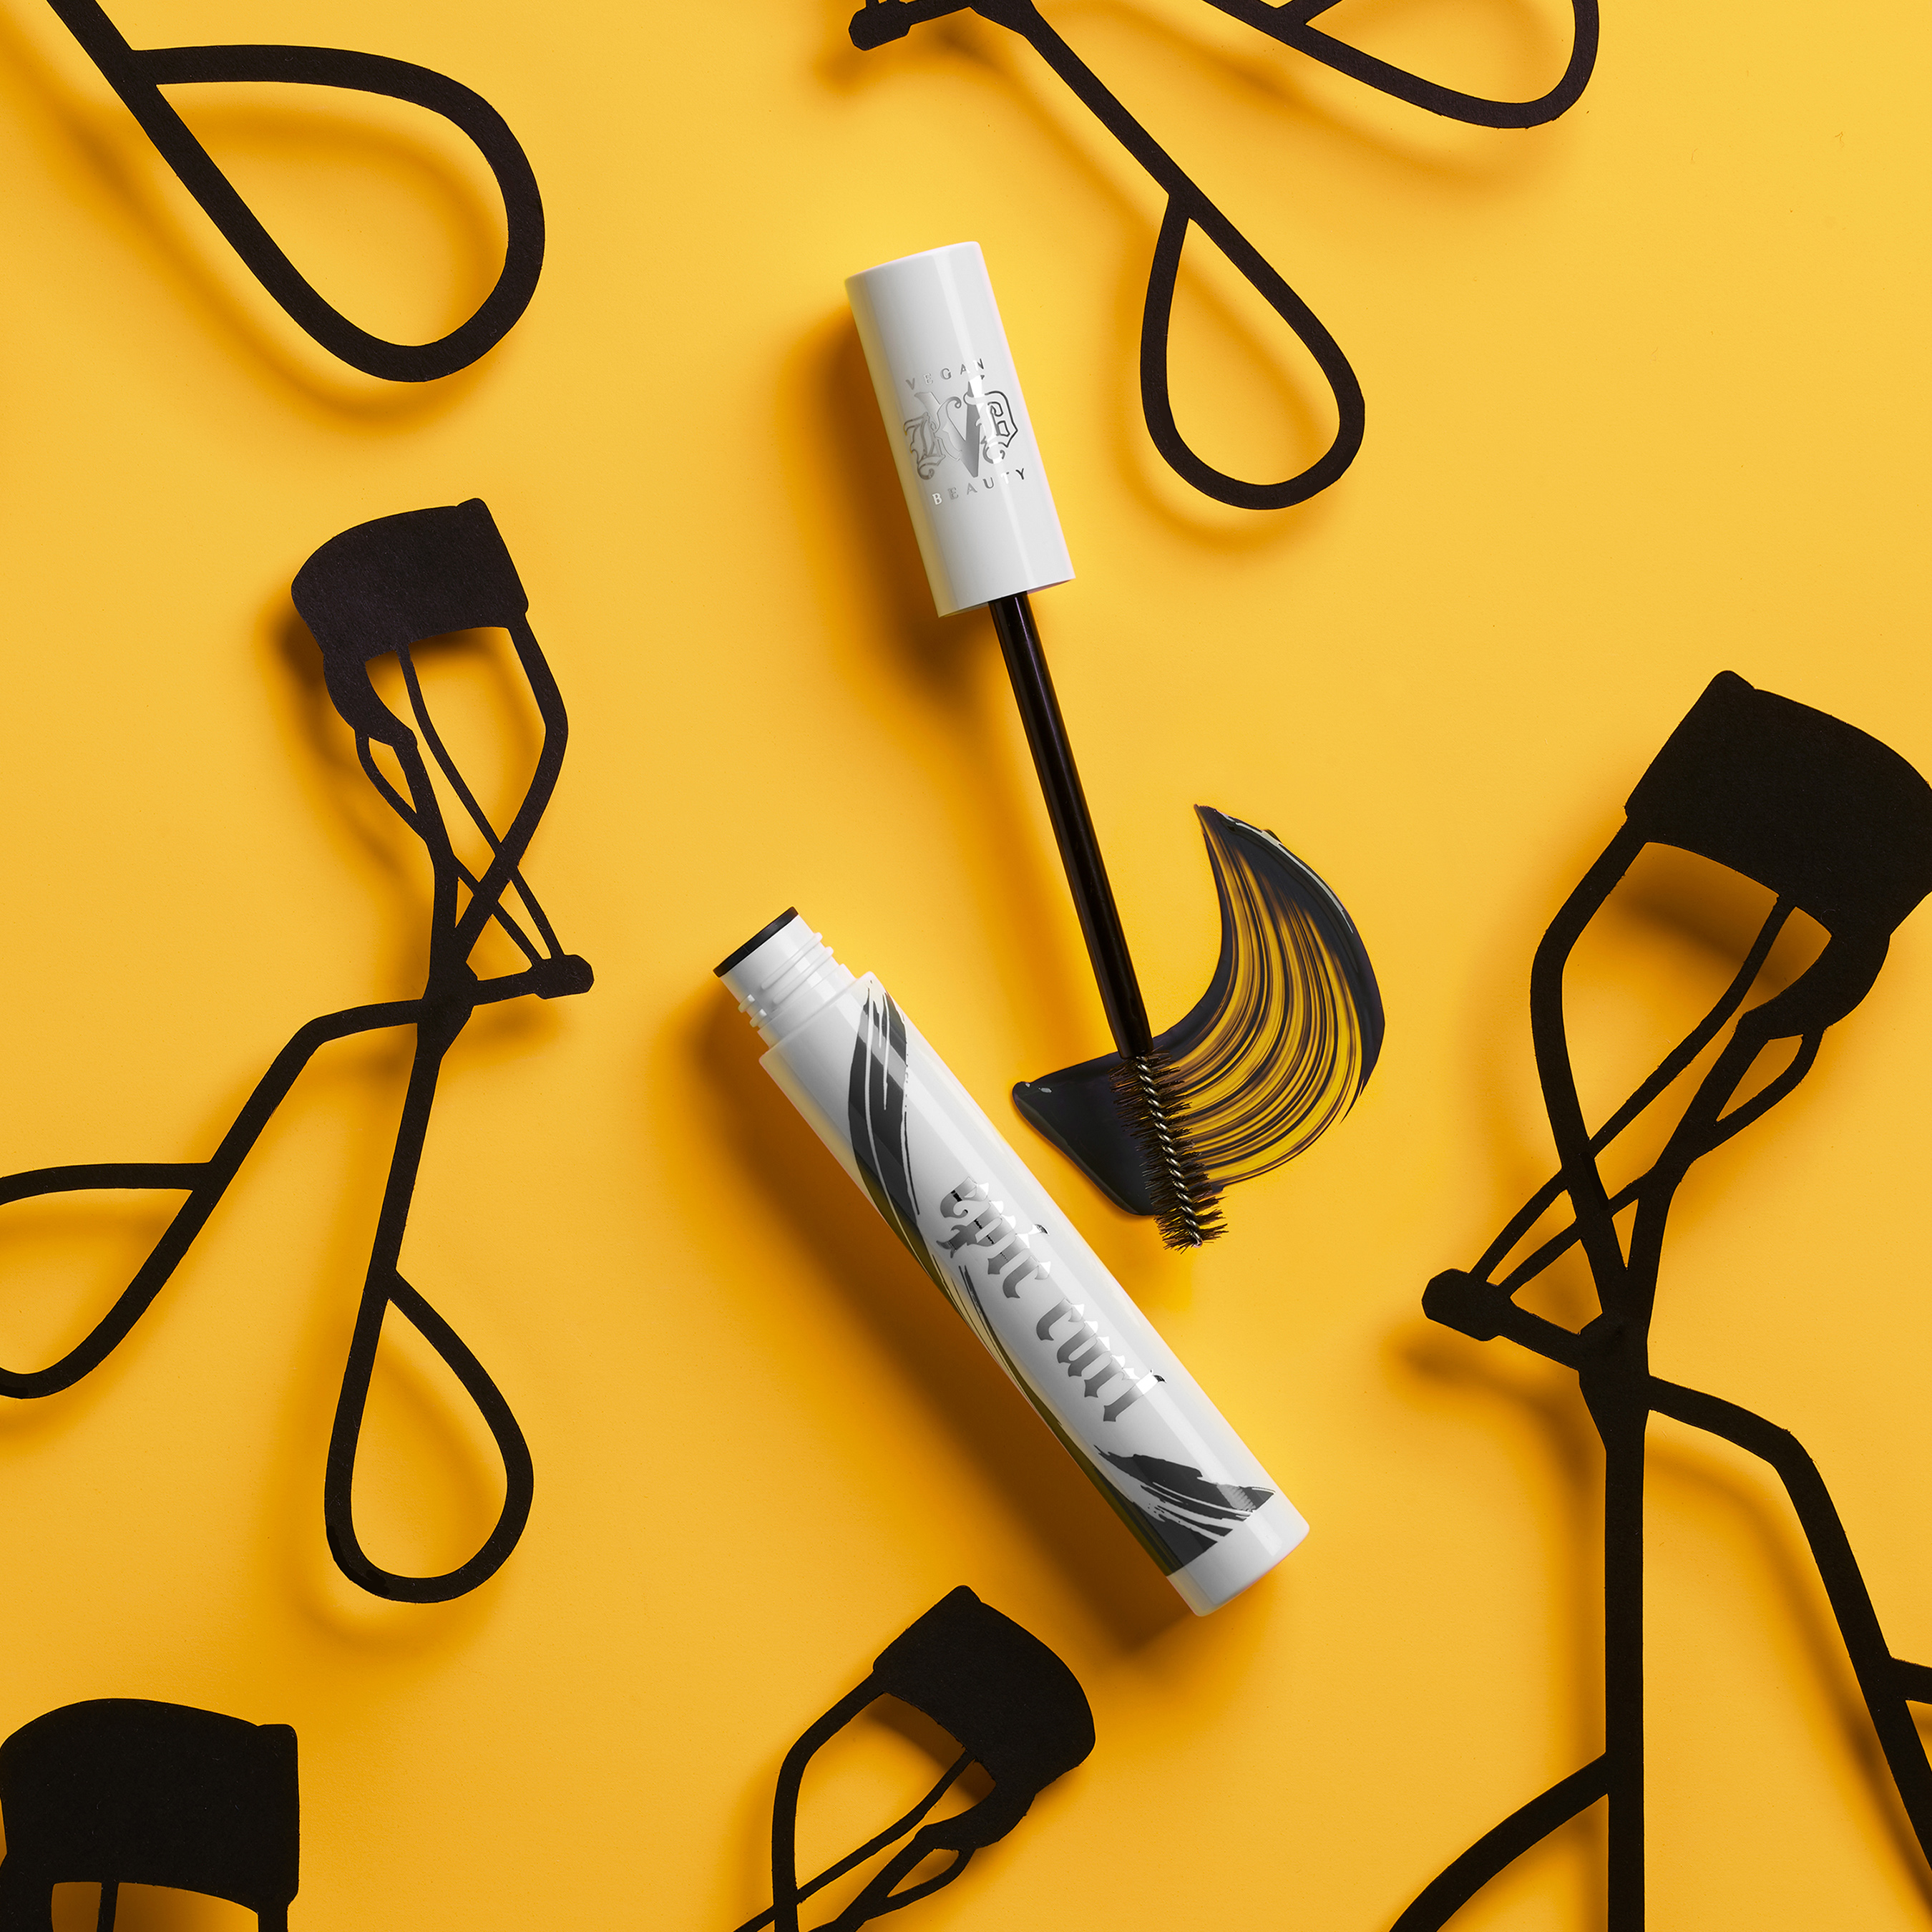 Throw away your eyelash curler, NEW Epic Curl Vegan Lash Primer is an innovative formula that provides the lift and curl of a traditional eyelash curler without the damaging effects